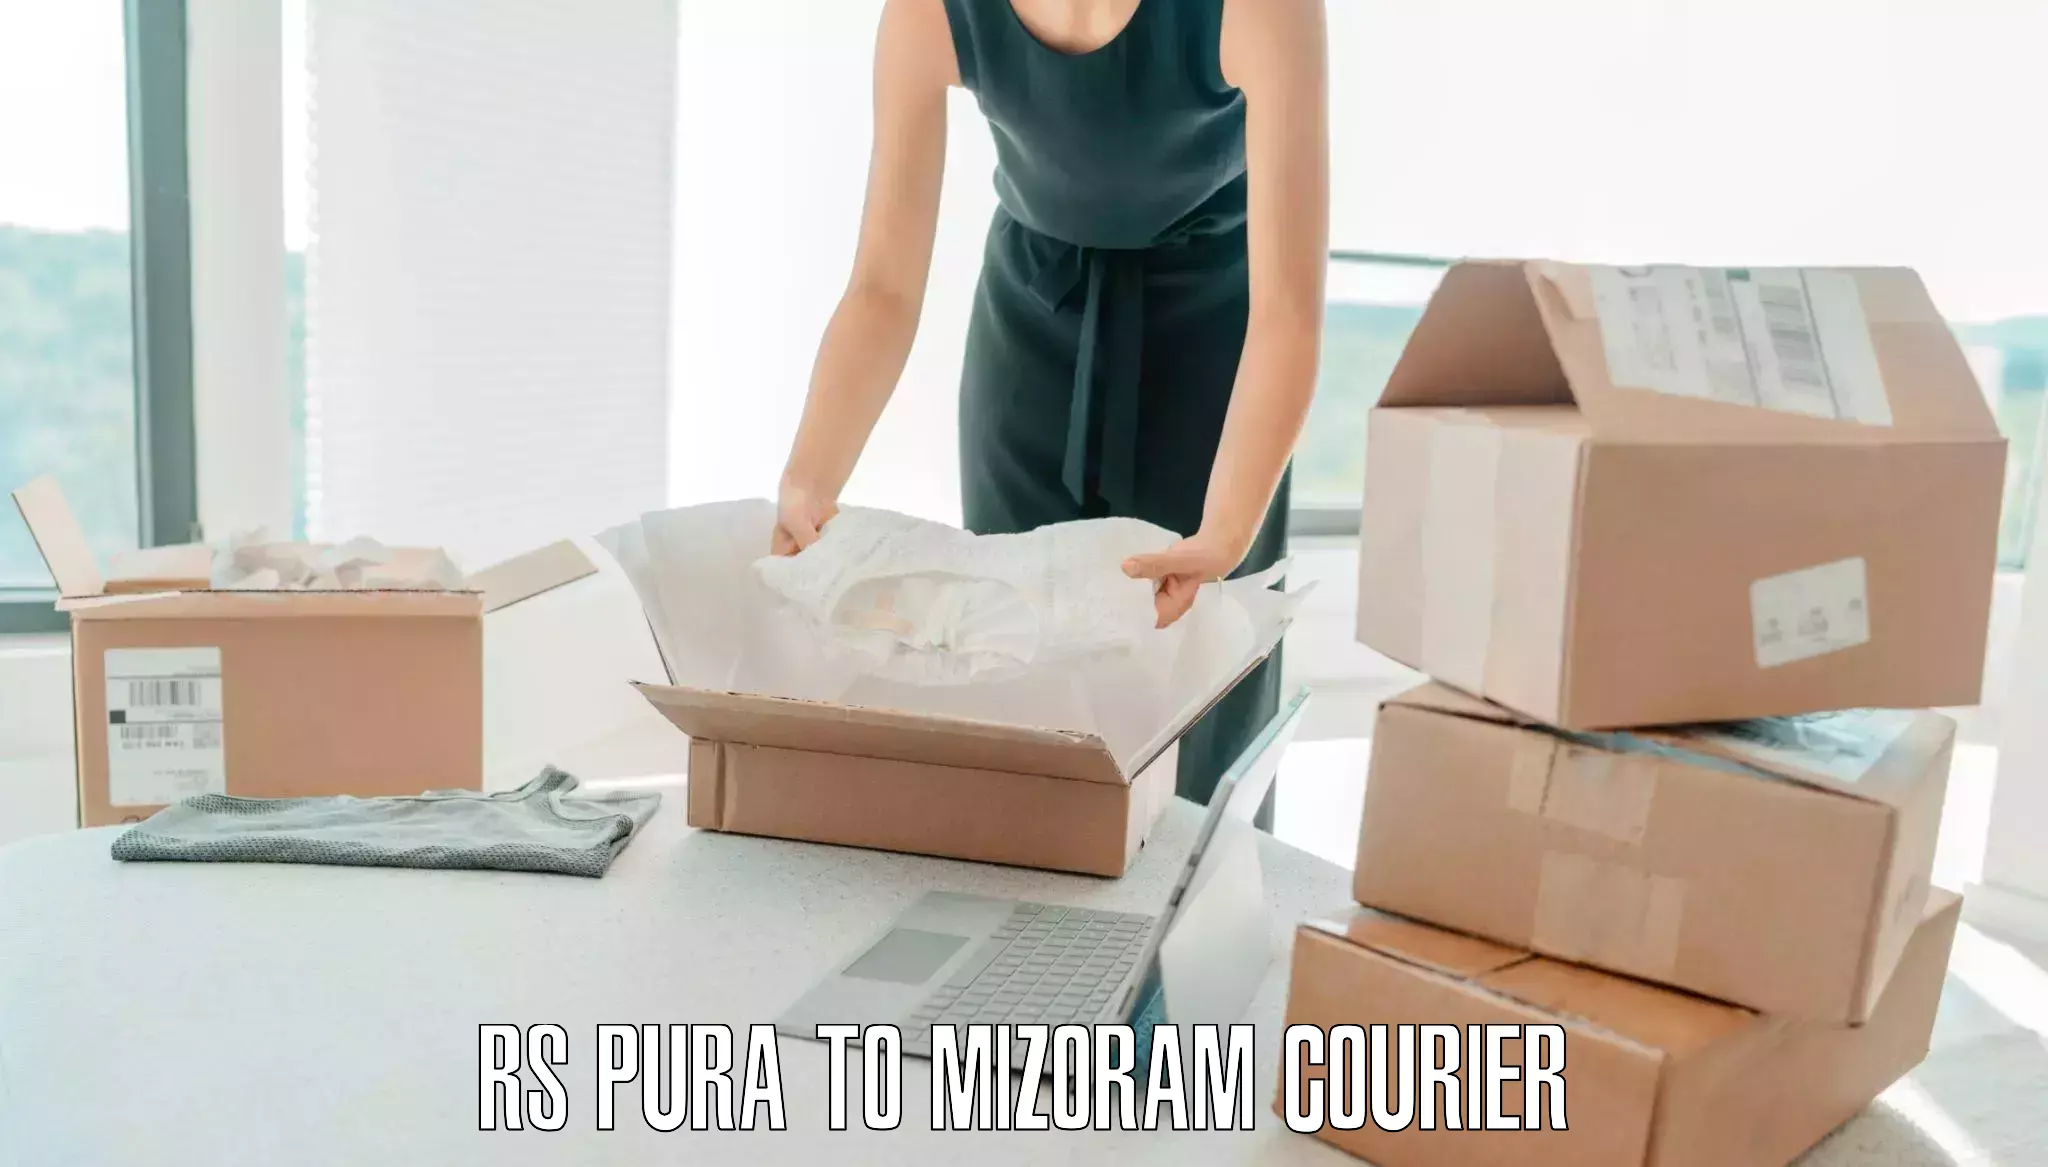 Luggage transport consultancy RS Pura to Siaha